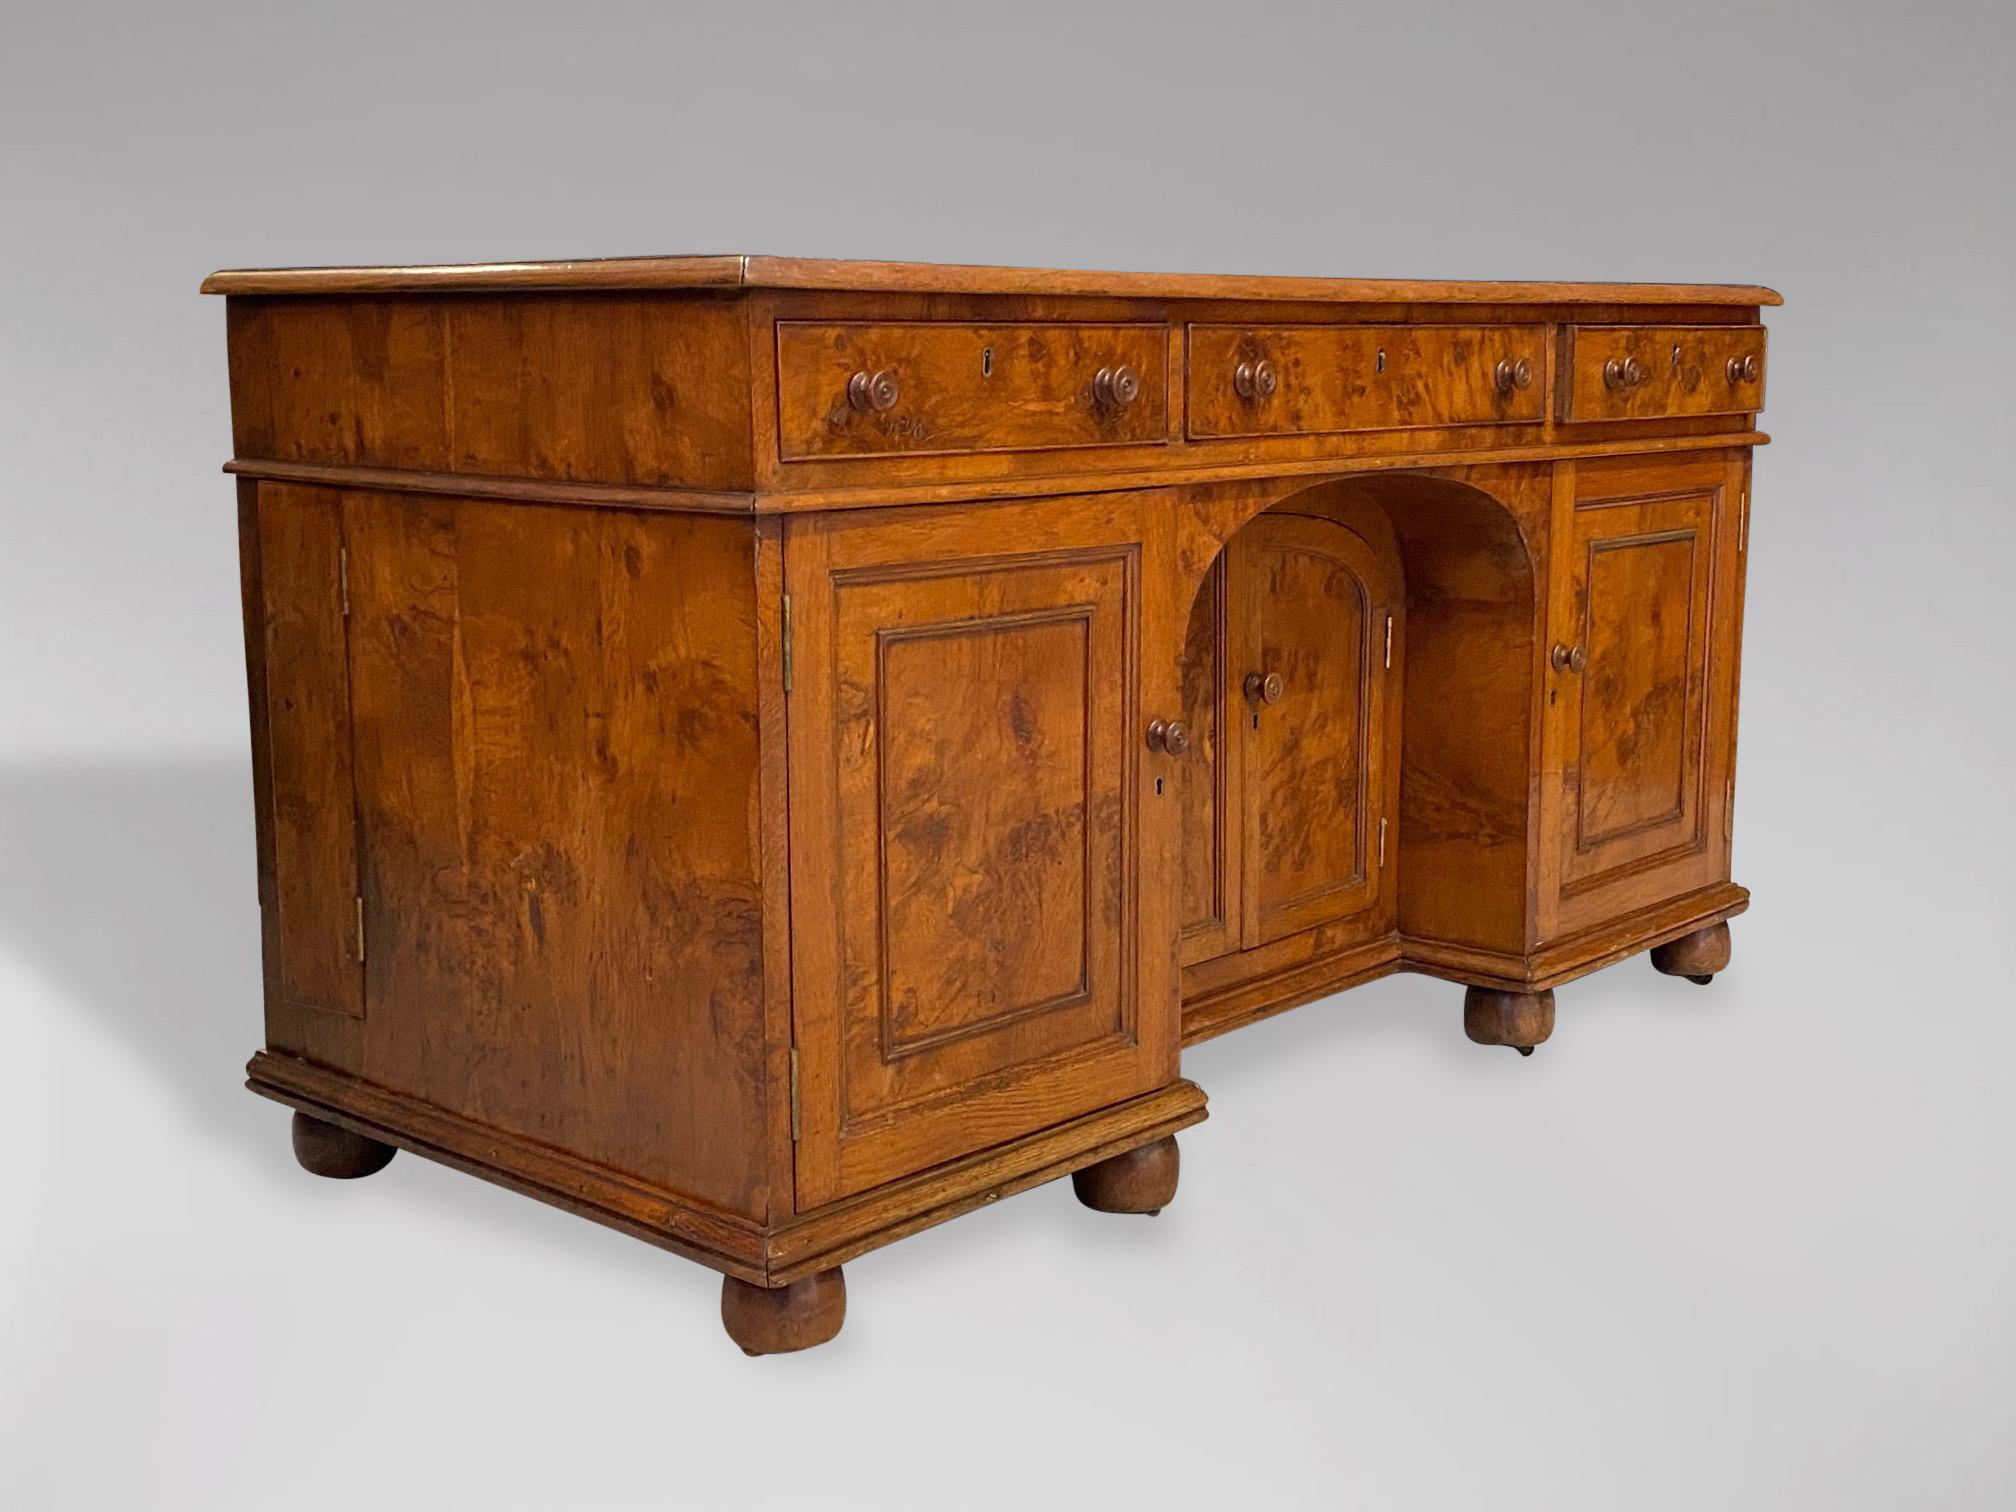 A stunning quality 19th century knee hole desk in pollard oak. Rectangular top above three oak lined drawers, above three cupboards, all standing on eight bun feet with brass castors. Warm rich colour and patina! Exceptional quality!

The